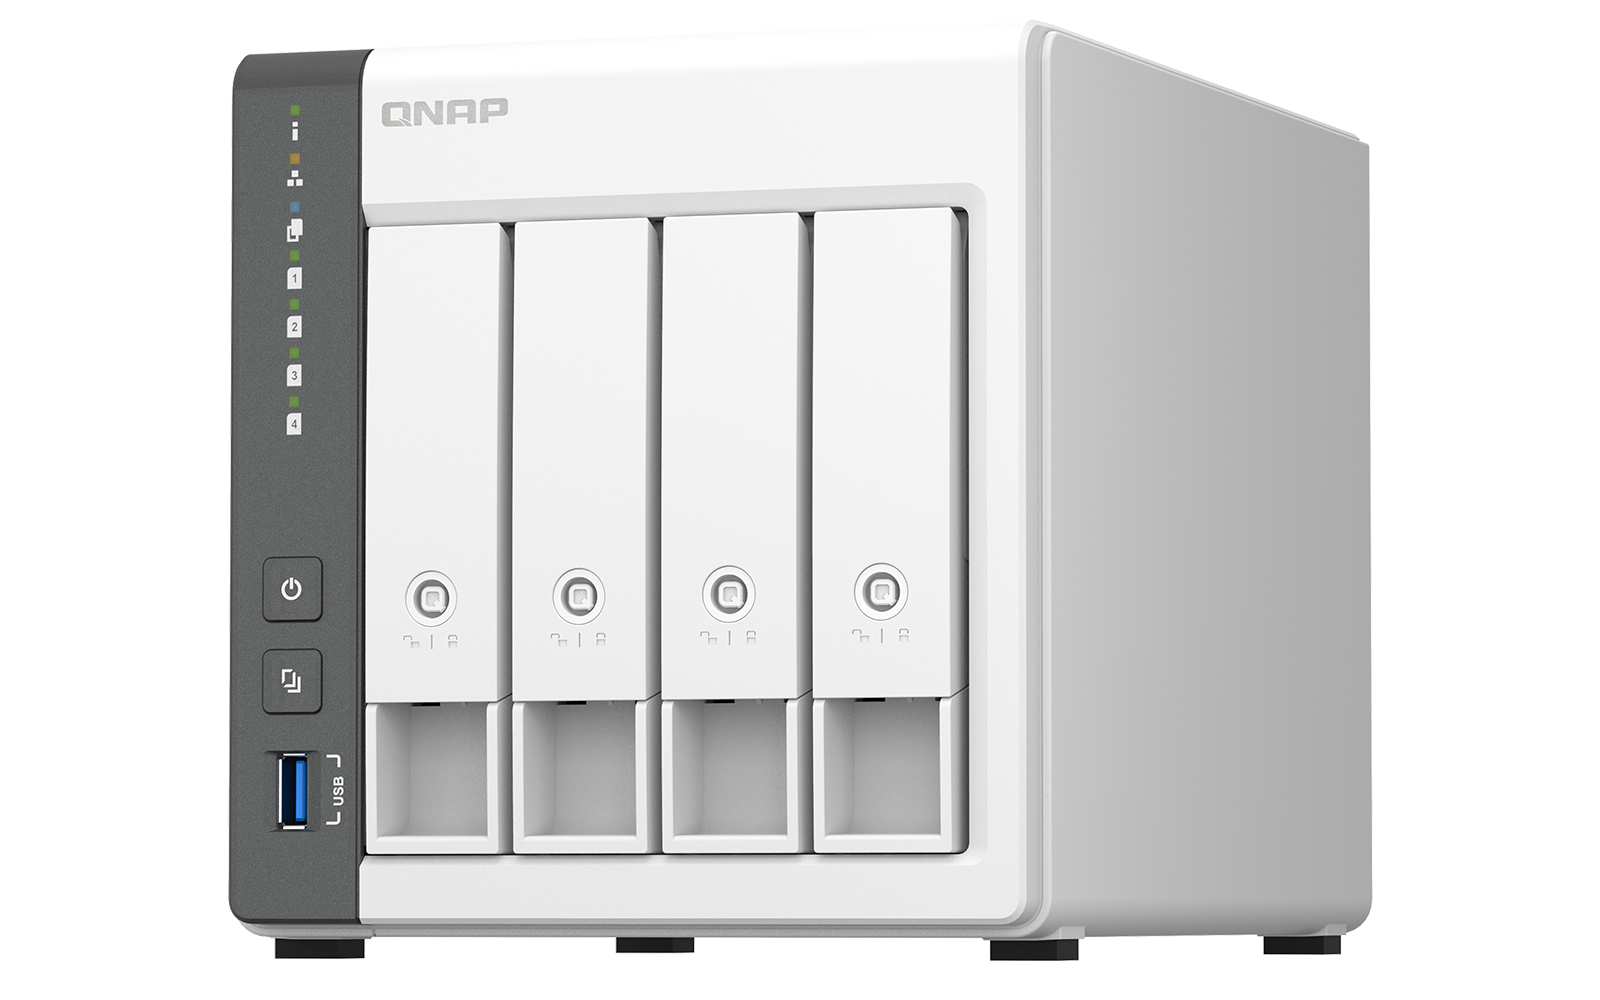 QNAP TS-433-4G Build a personal private cloud & home multimedia center with a built-in NPU to boost AI-powered face recognition